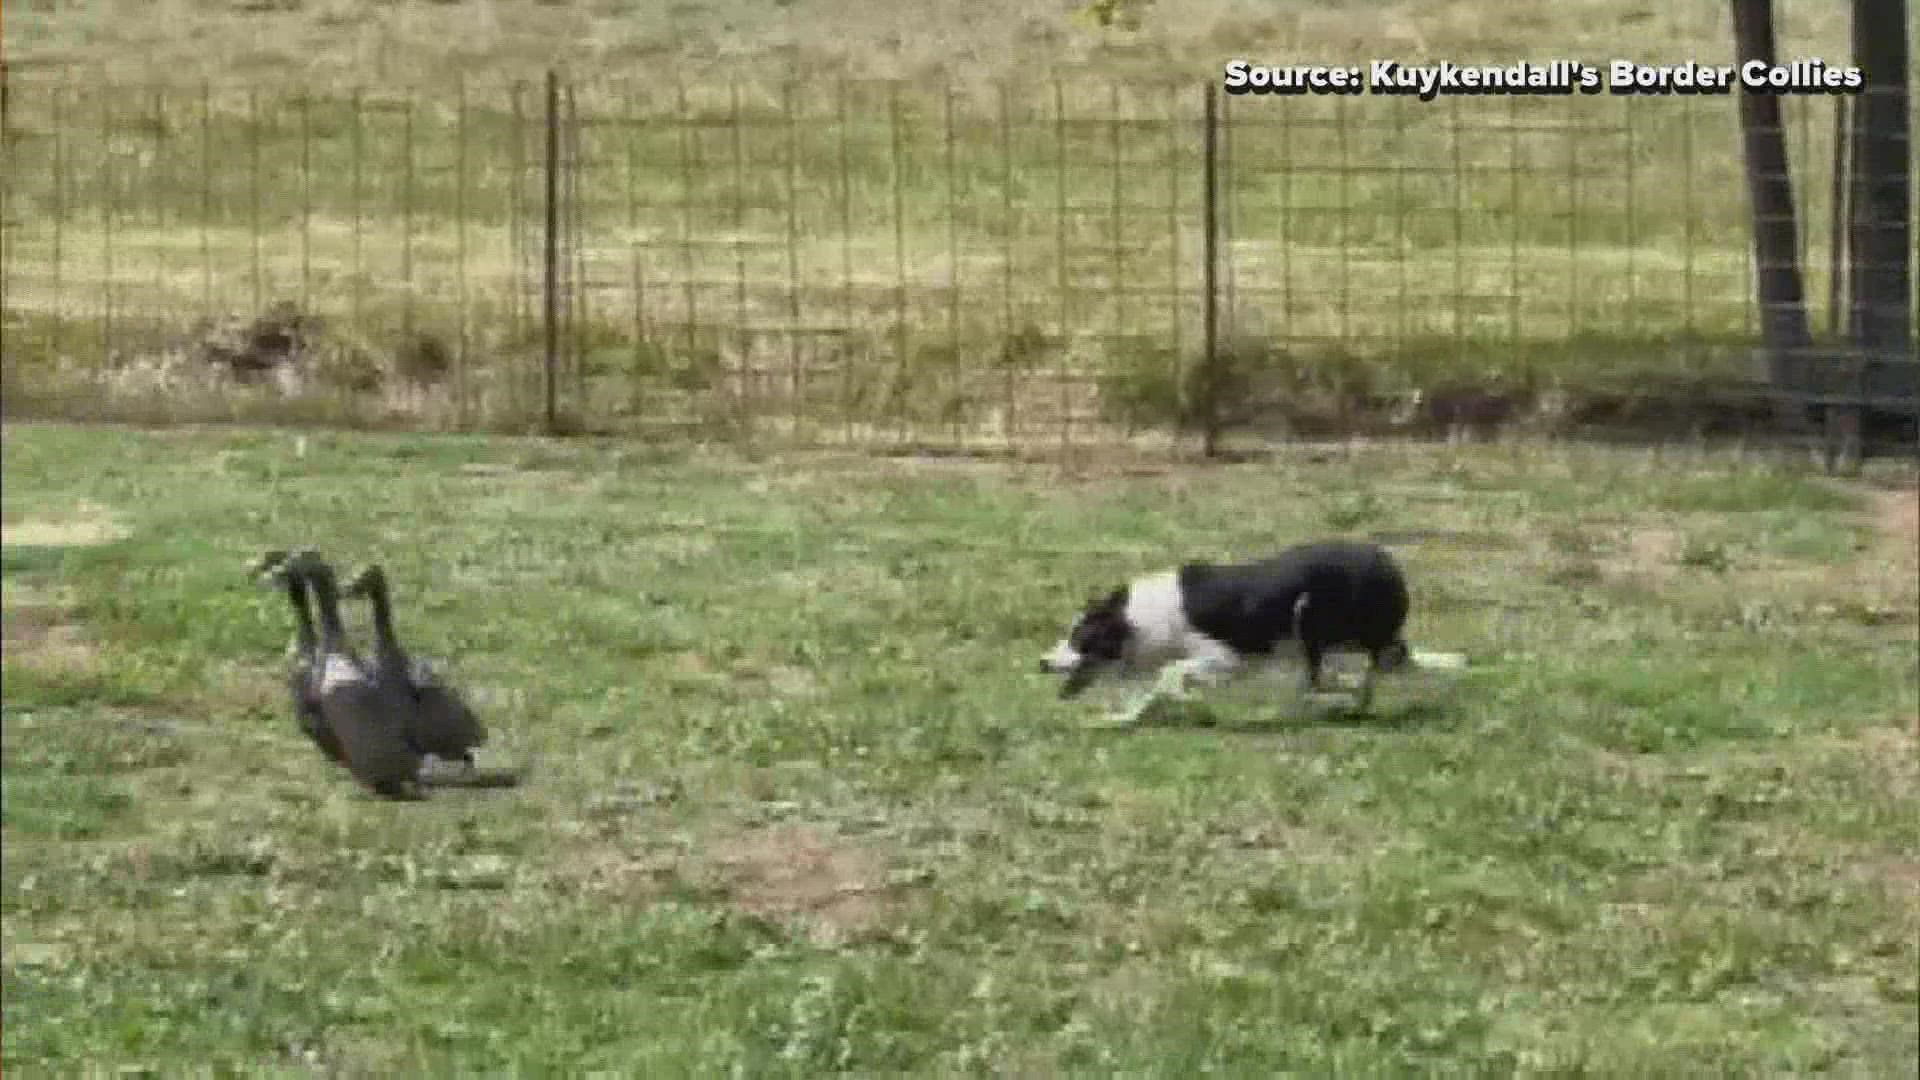 Kuykendall's Border Collies in Franklinville, NC are now working to protect missile sites.